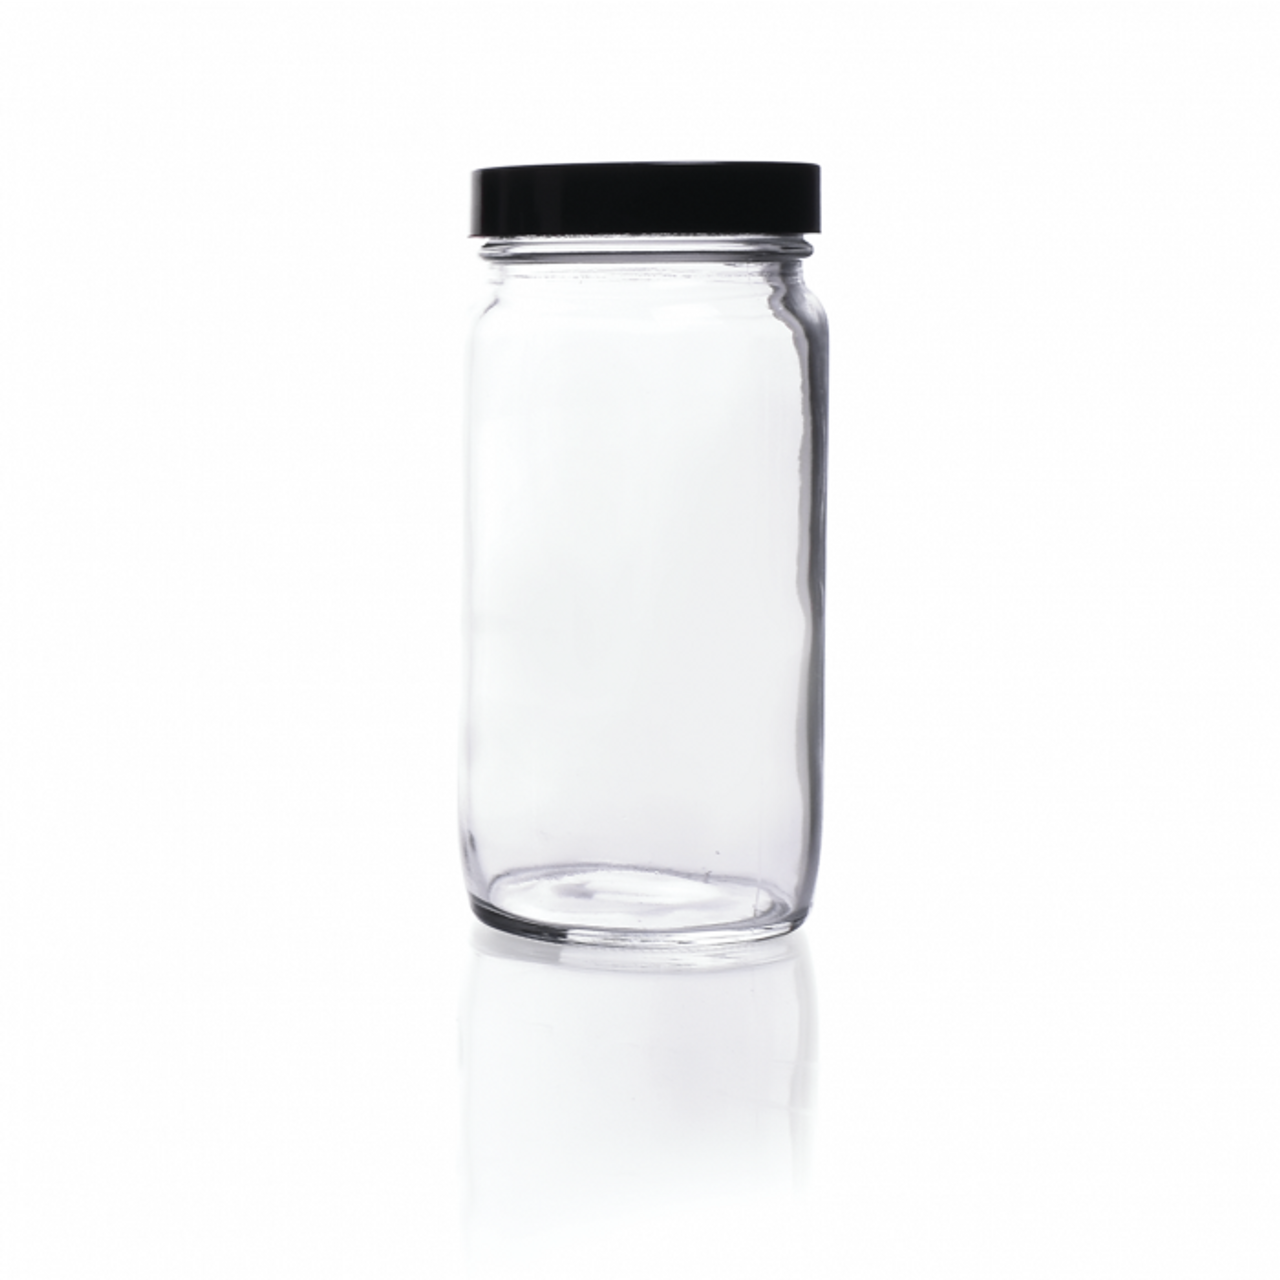 Kimble Type III Soda-Lime Glass Clear Straight-Sided Wide Mouth Jars with Pulp/Vinyl Cap Liner Case of 24 6oz Capacity 